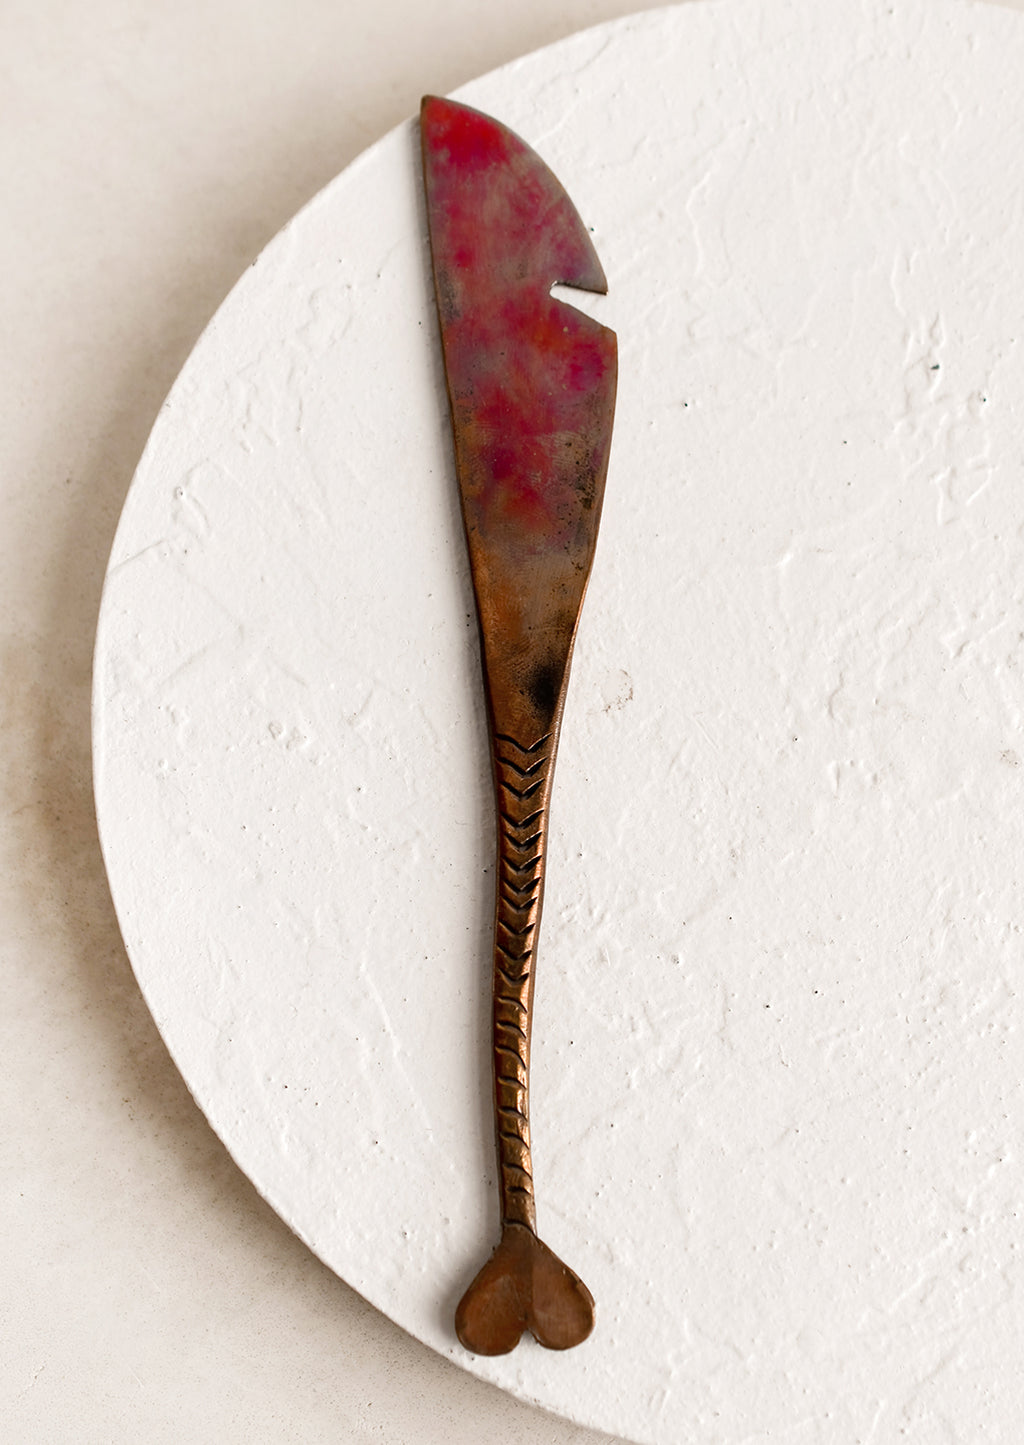 Knife: A copper knife with fish tail handle and oxidized finish.